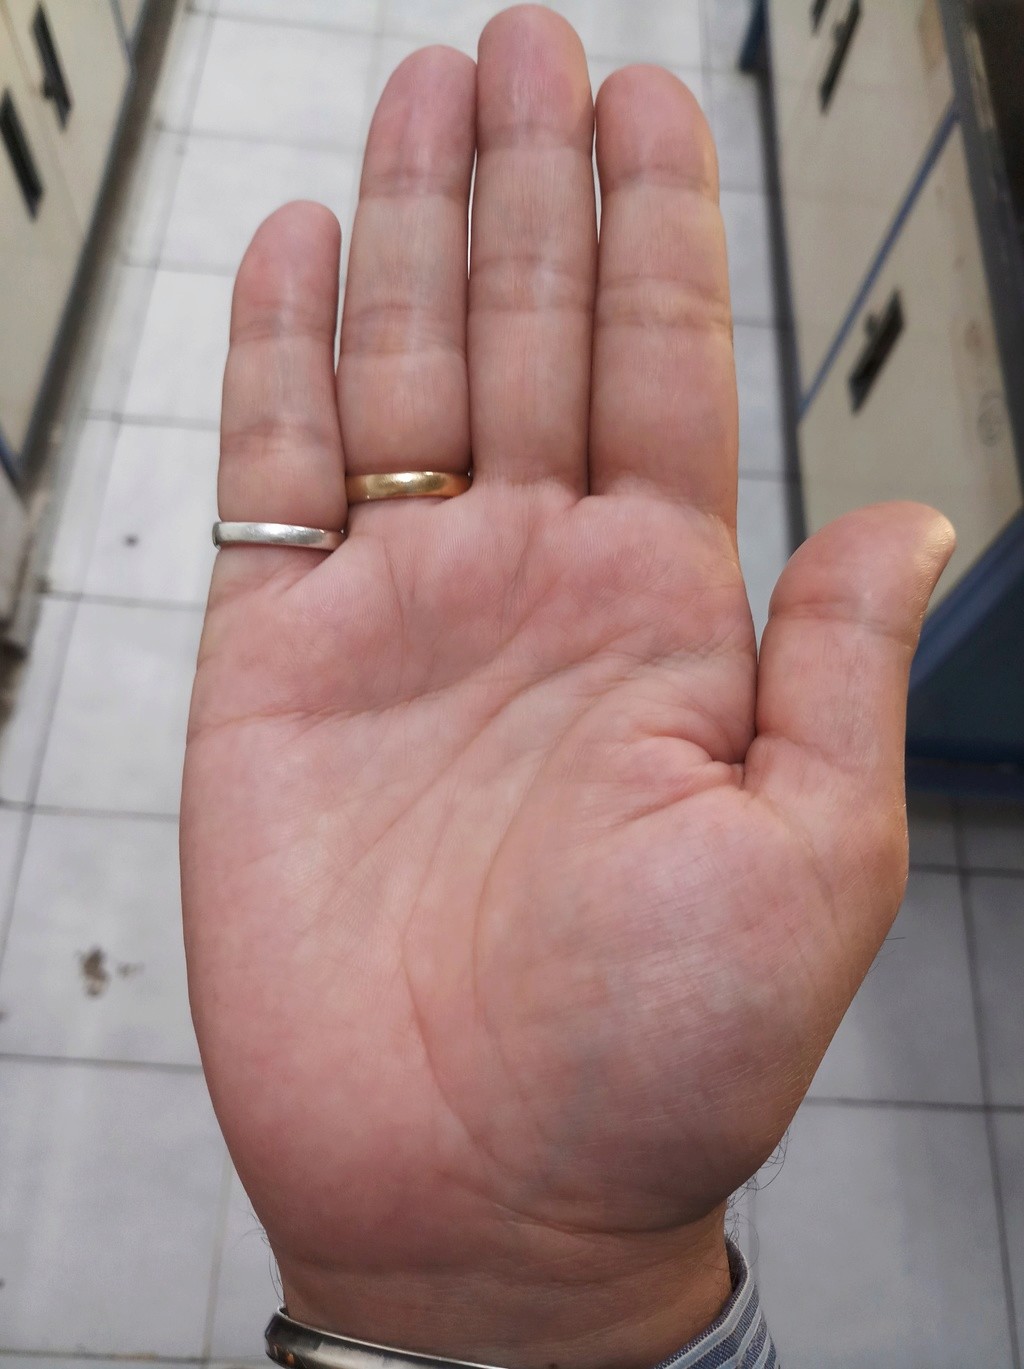 Not able to identify sign on my hand 20180411